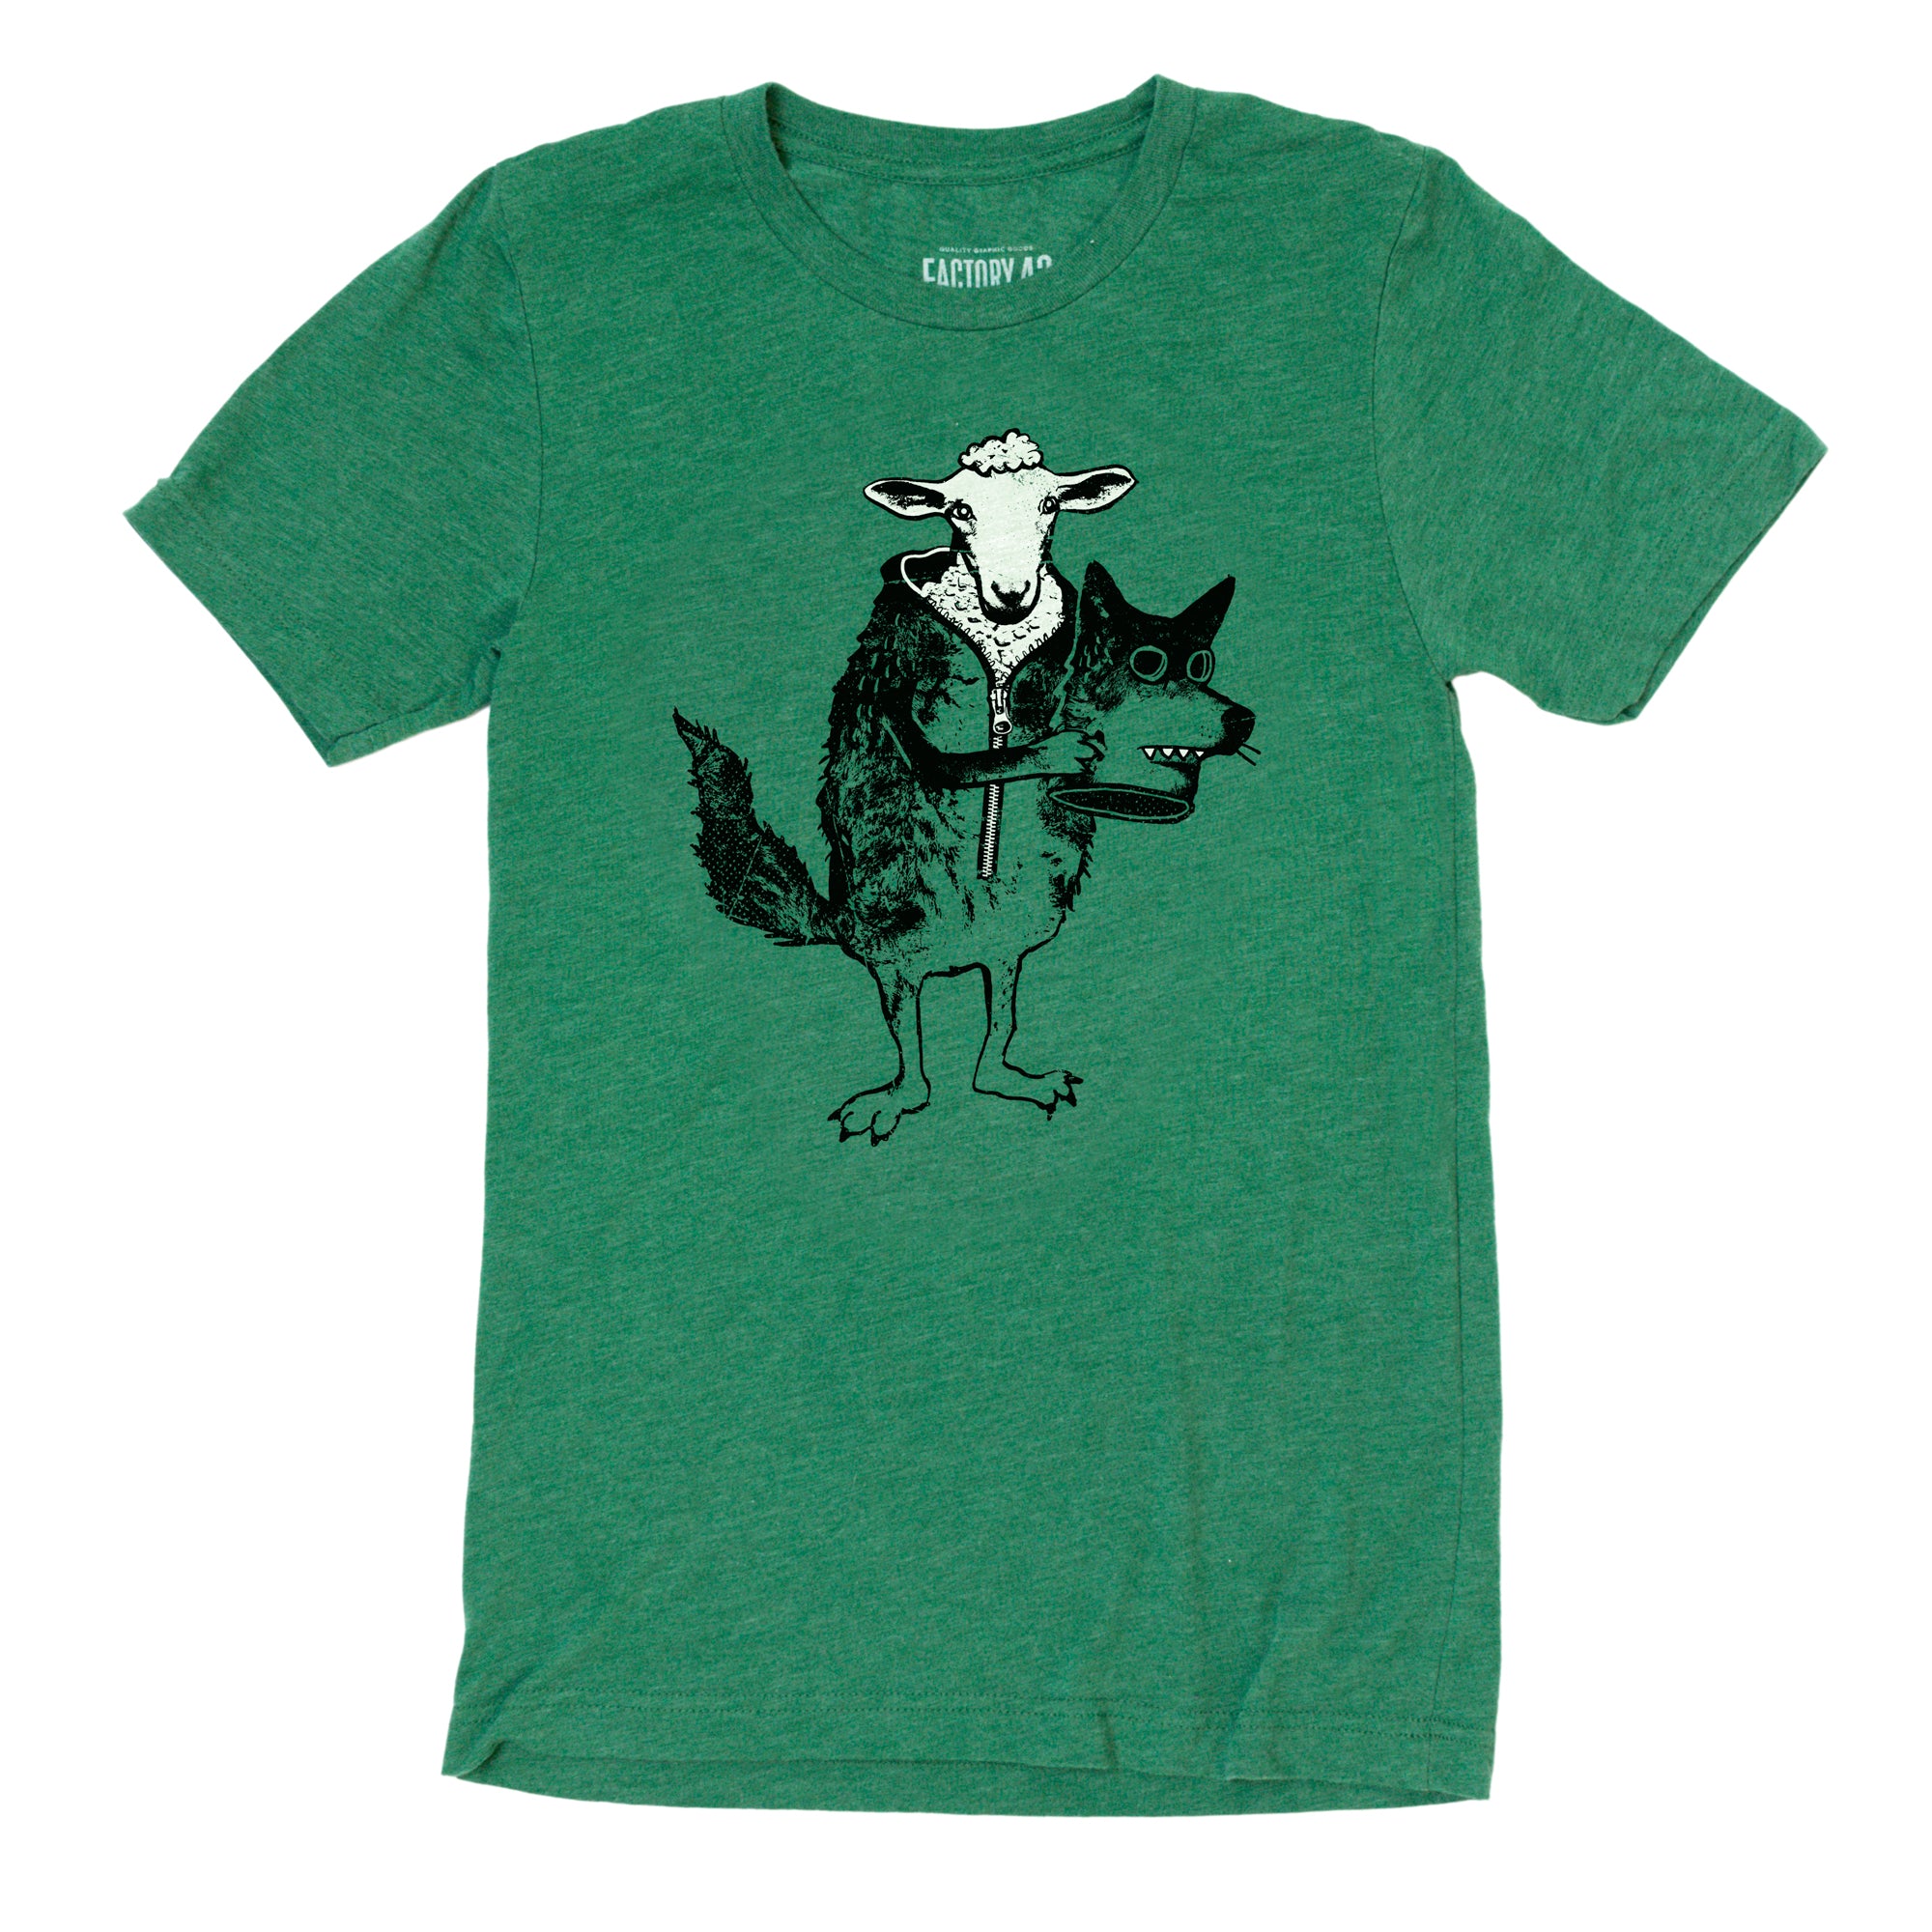 Super soft green mens/womens tshirt of a sheep wearing a wolf's costume. Factory 43 is a graphic design studio that makes art with a PNW vibe that reflects their Midwest/Southern roots. This cotton/polyester/rayon shirt printed in Seattle, Washington.